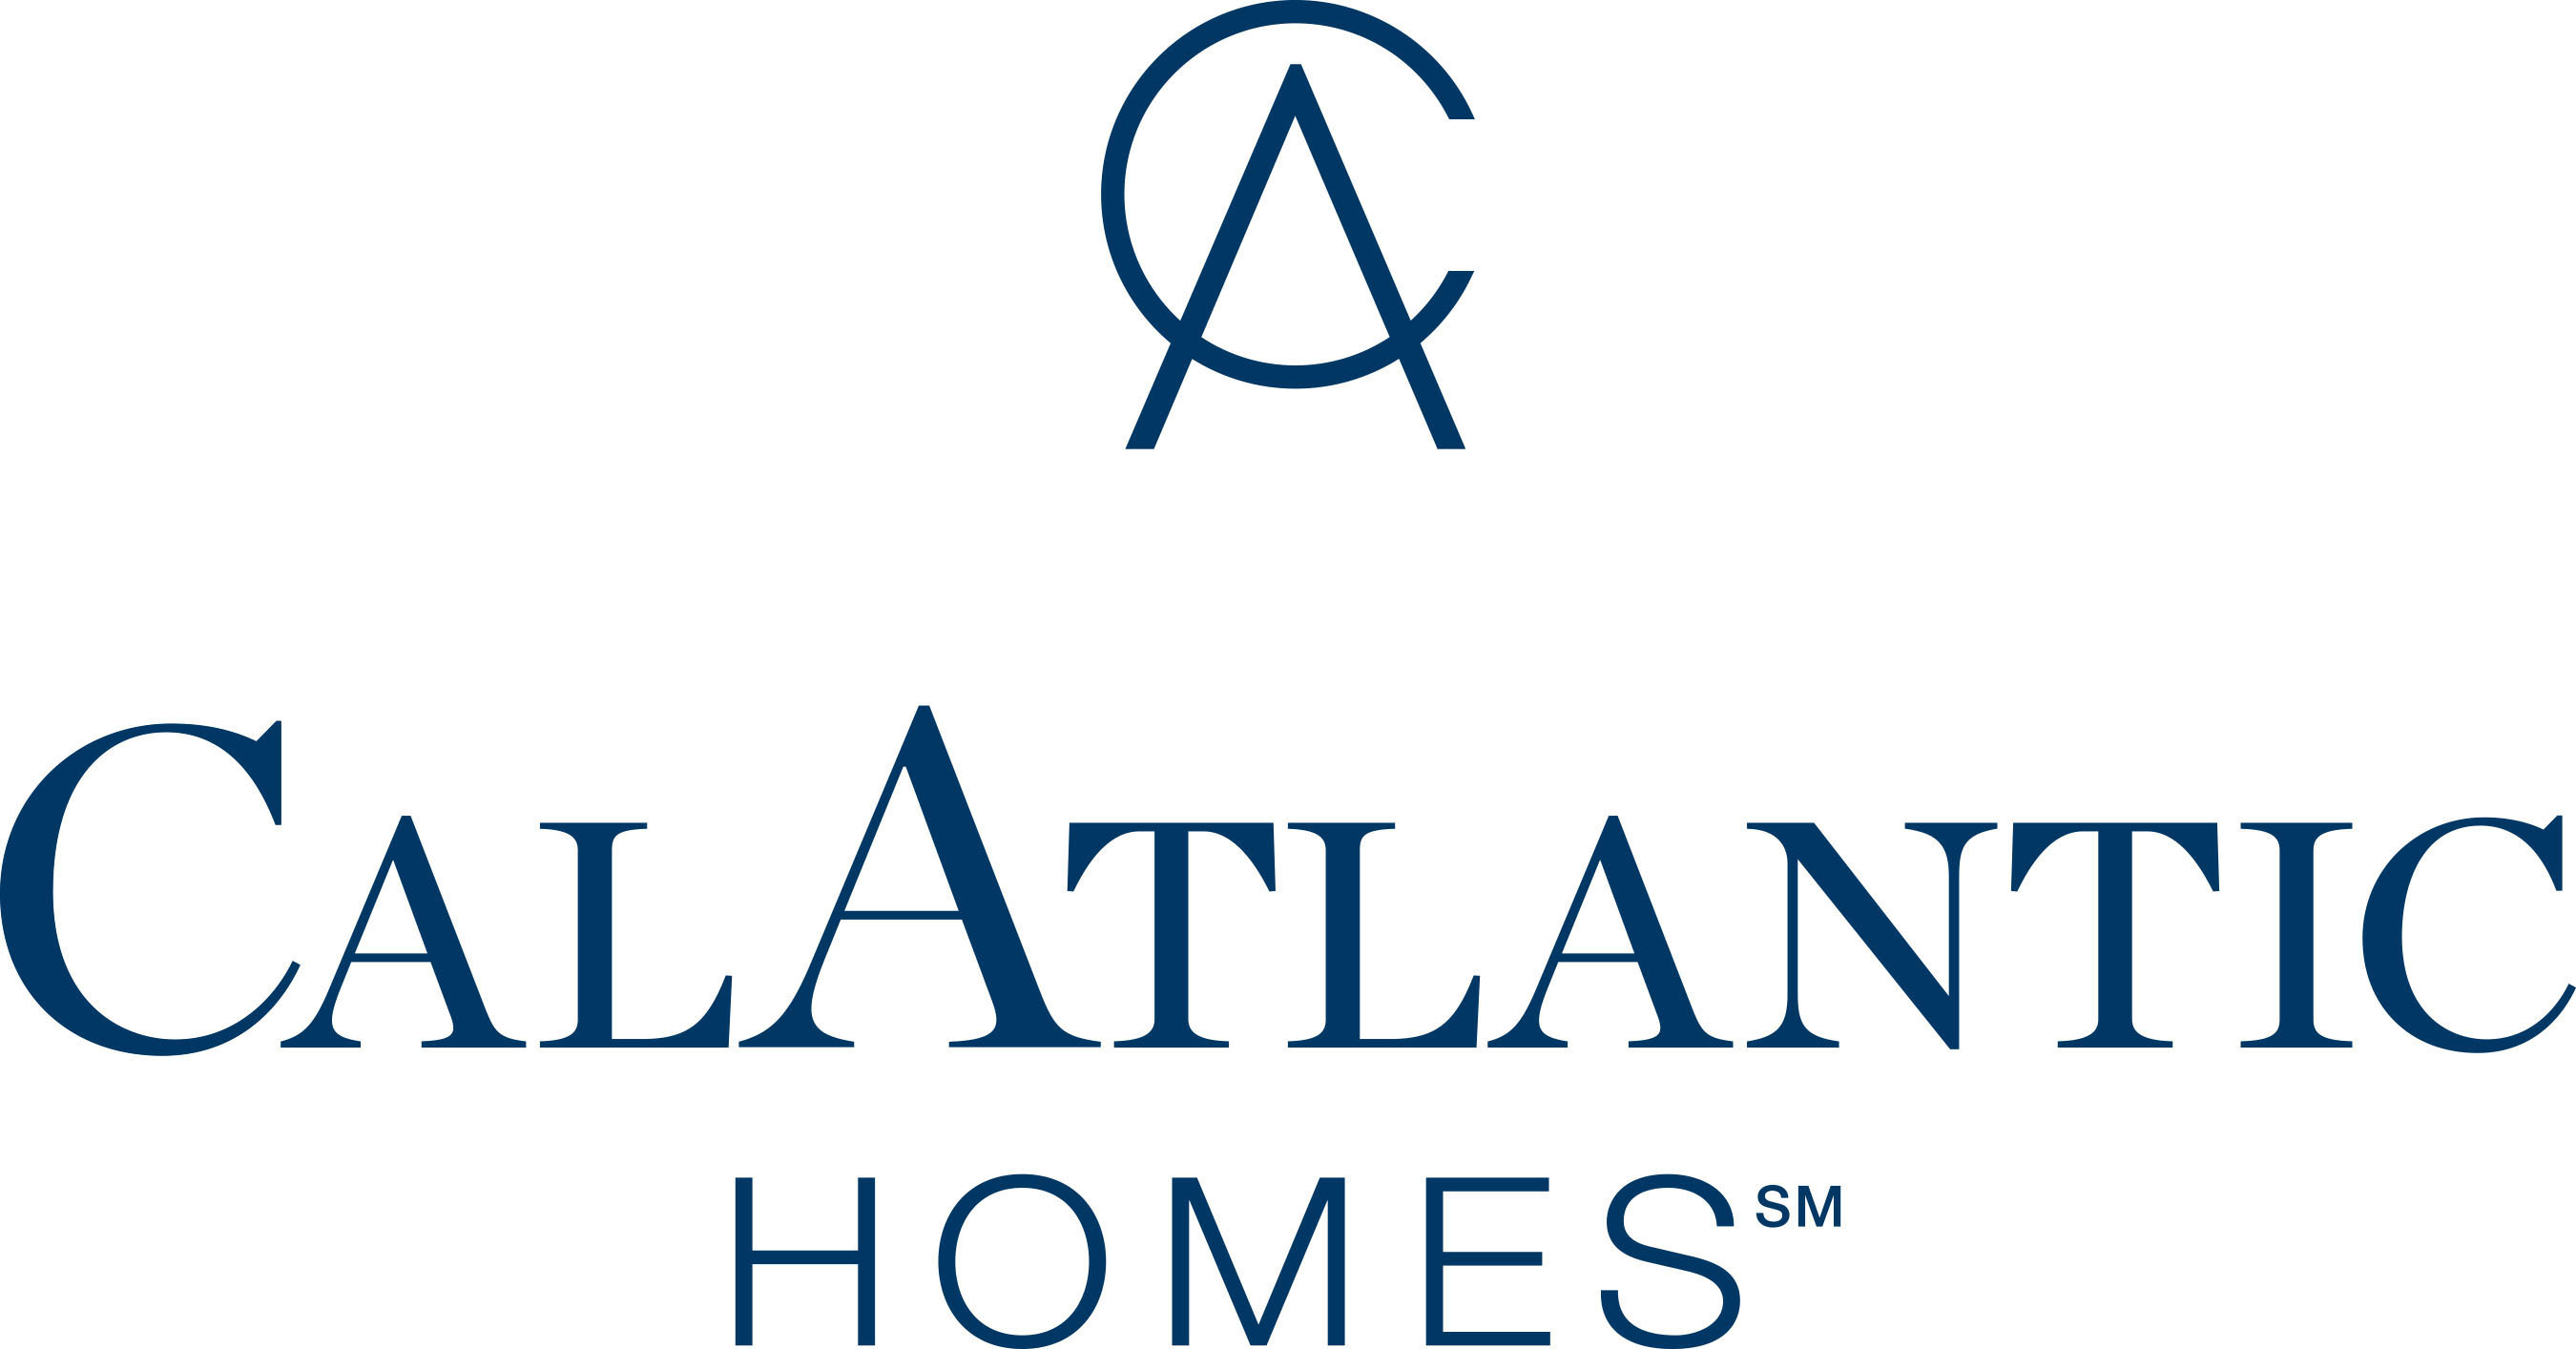 The Home Builders Association (HBA) of Greater Austin awarded CalAtlantic Homes with the Grand MAX Large Volume Builder of the Year Award for the second consecutive year at their annual Marketing and Advertising Excellence (MAX) Awards and Gala.